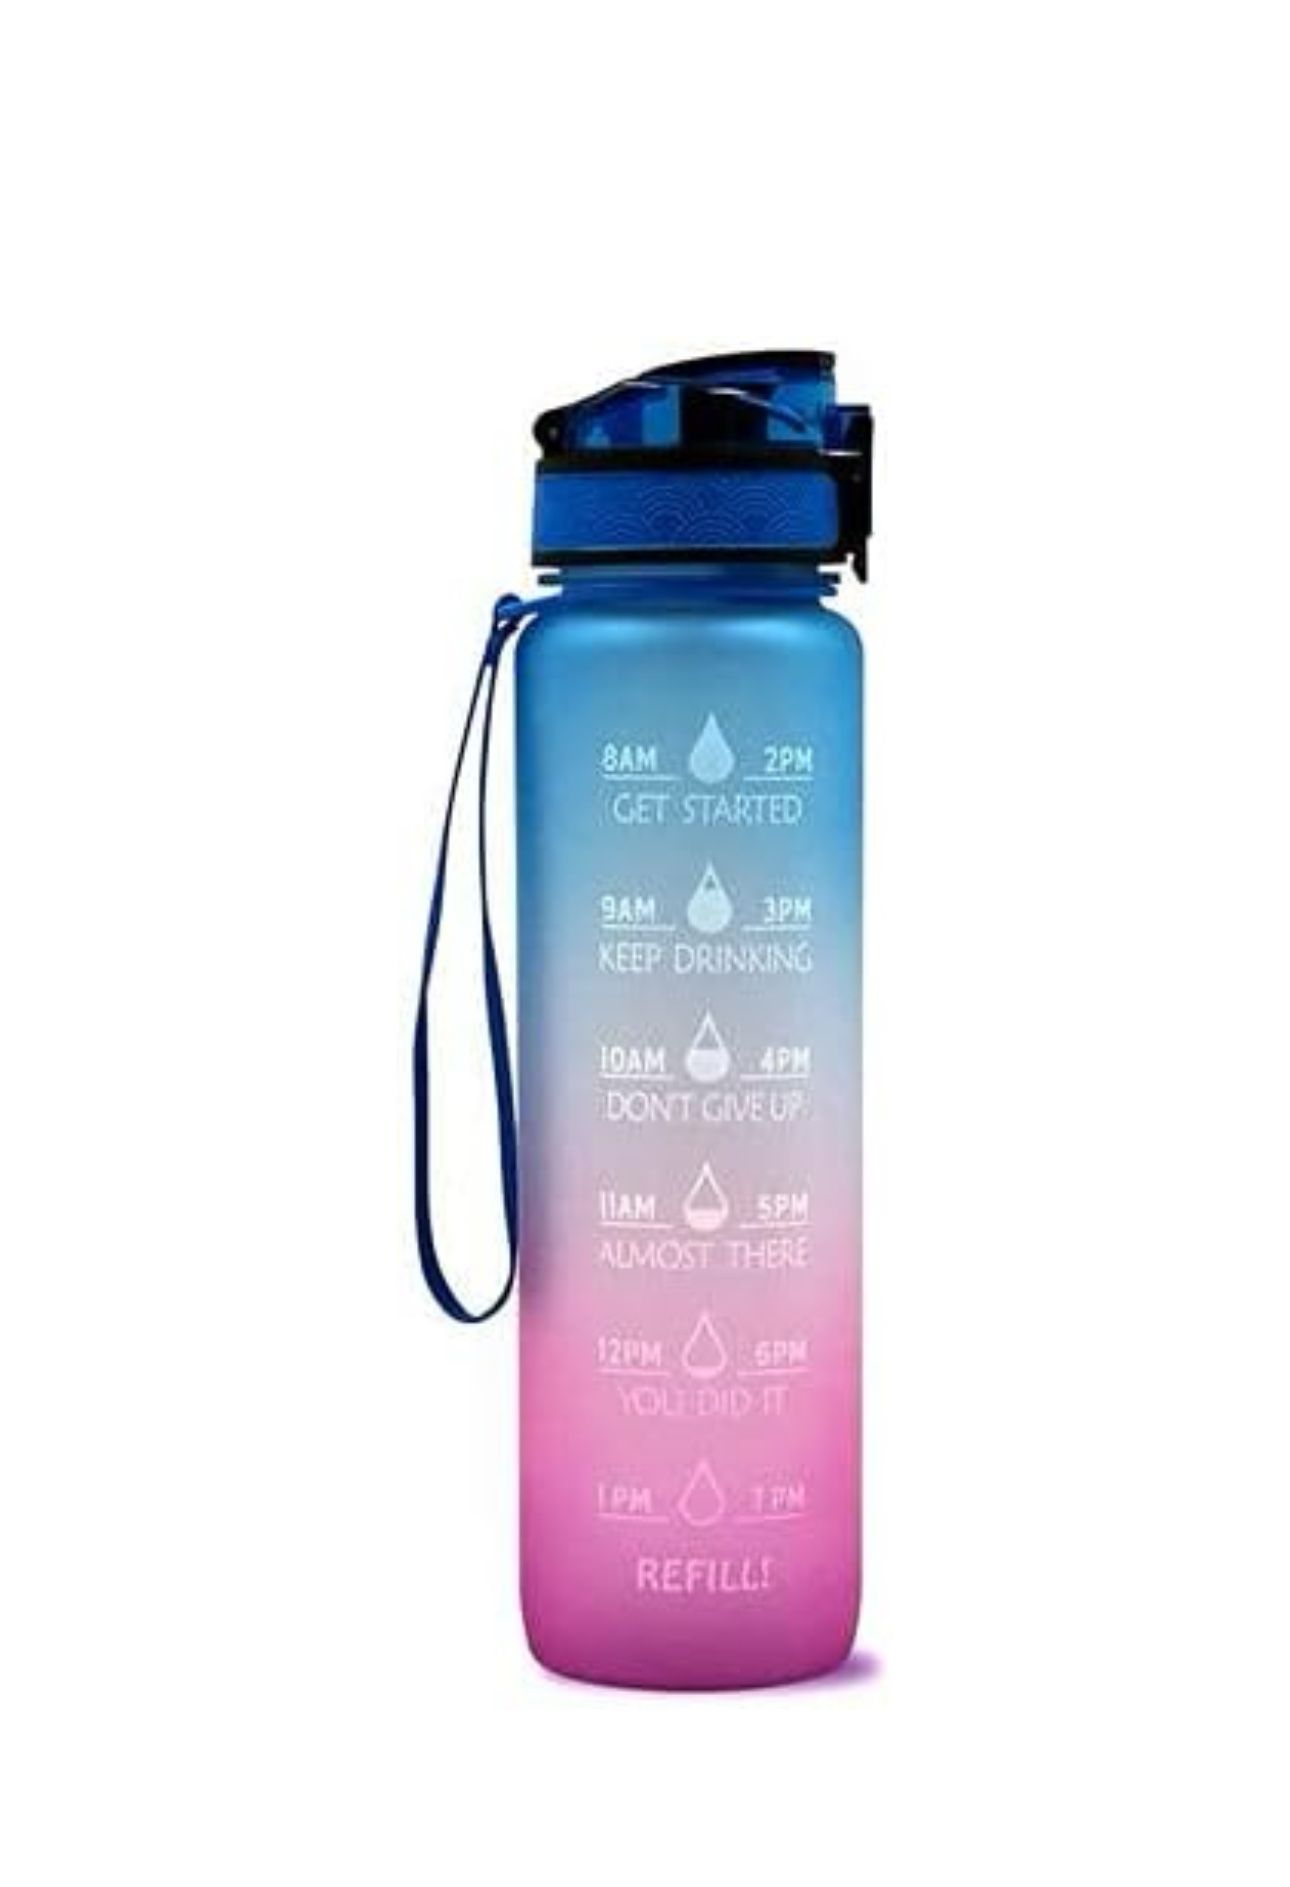 Motivational Water Bottle, Leakproof Water Bottles with Times to Drink for Home Office Fitness Sports-1L (Blue)